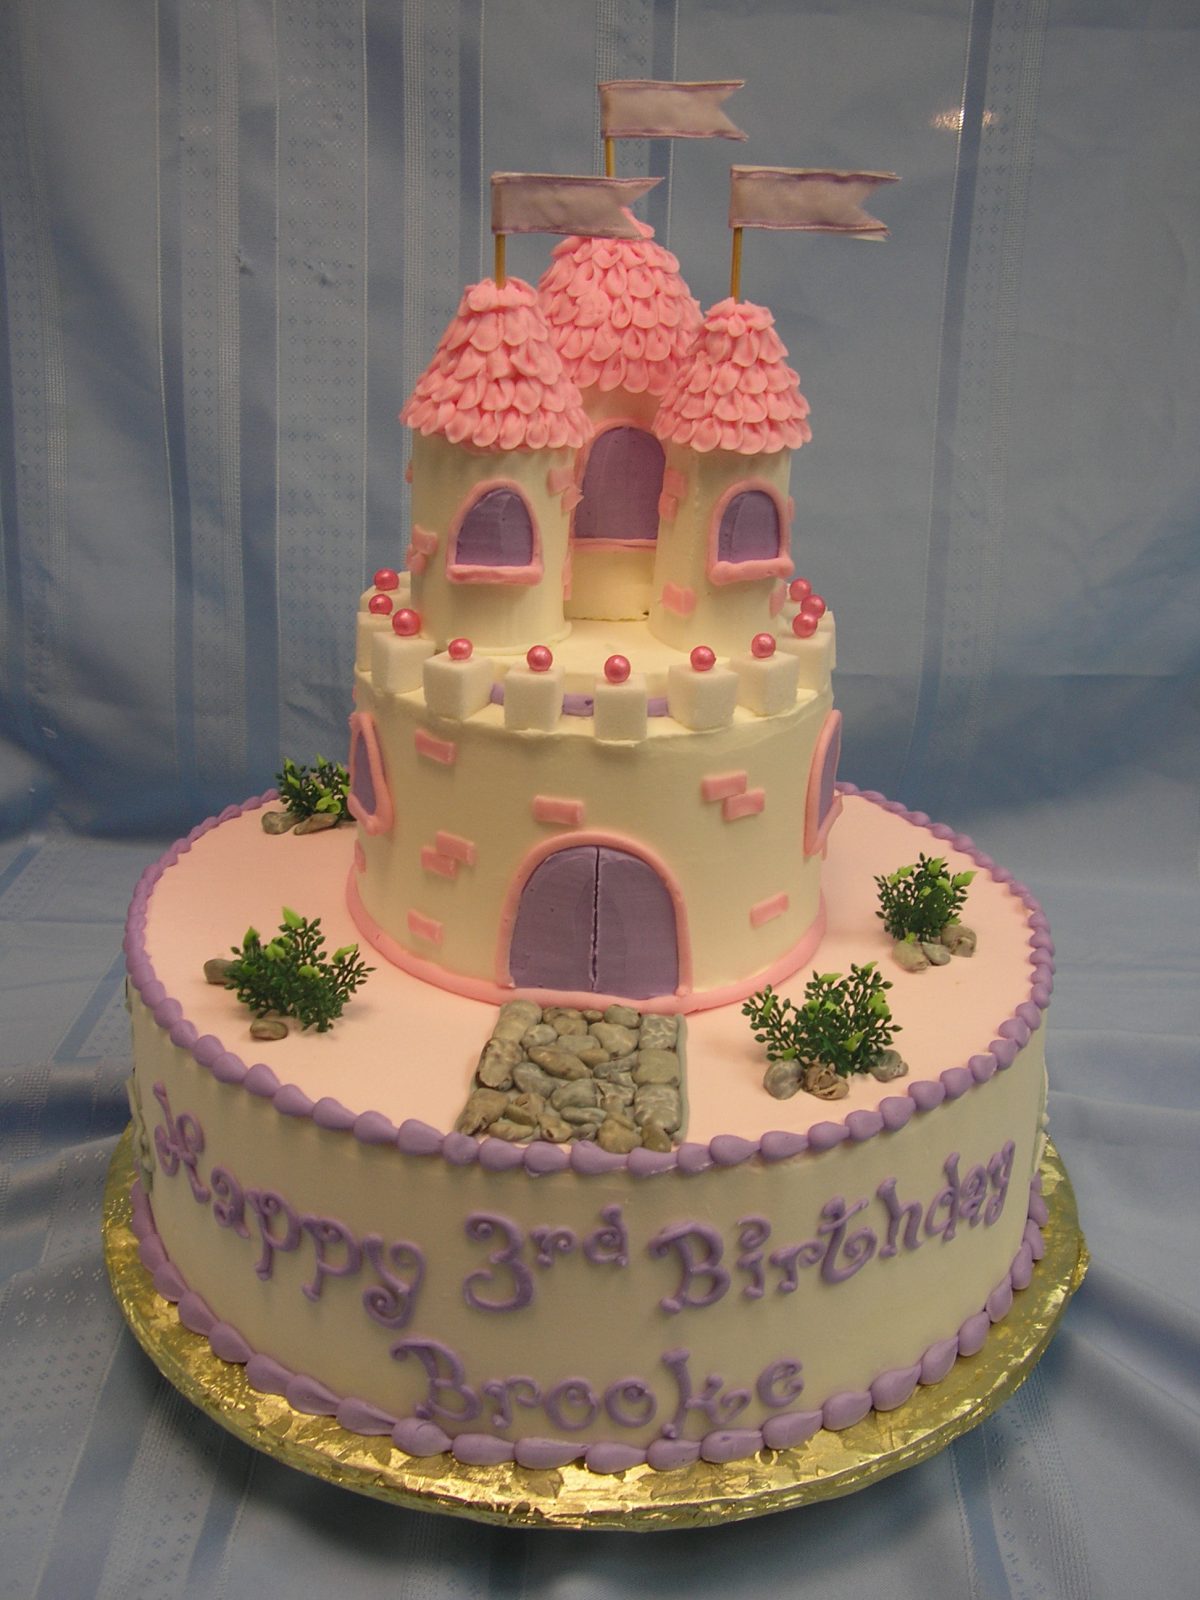 2 tier castle cake, cake with castle and moat